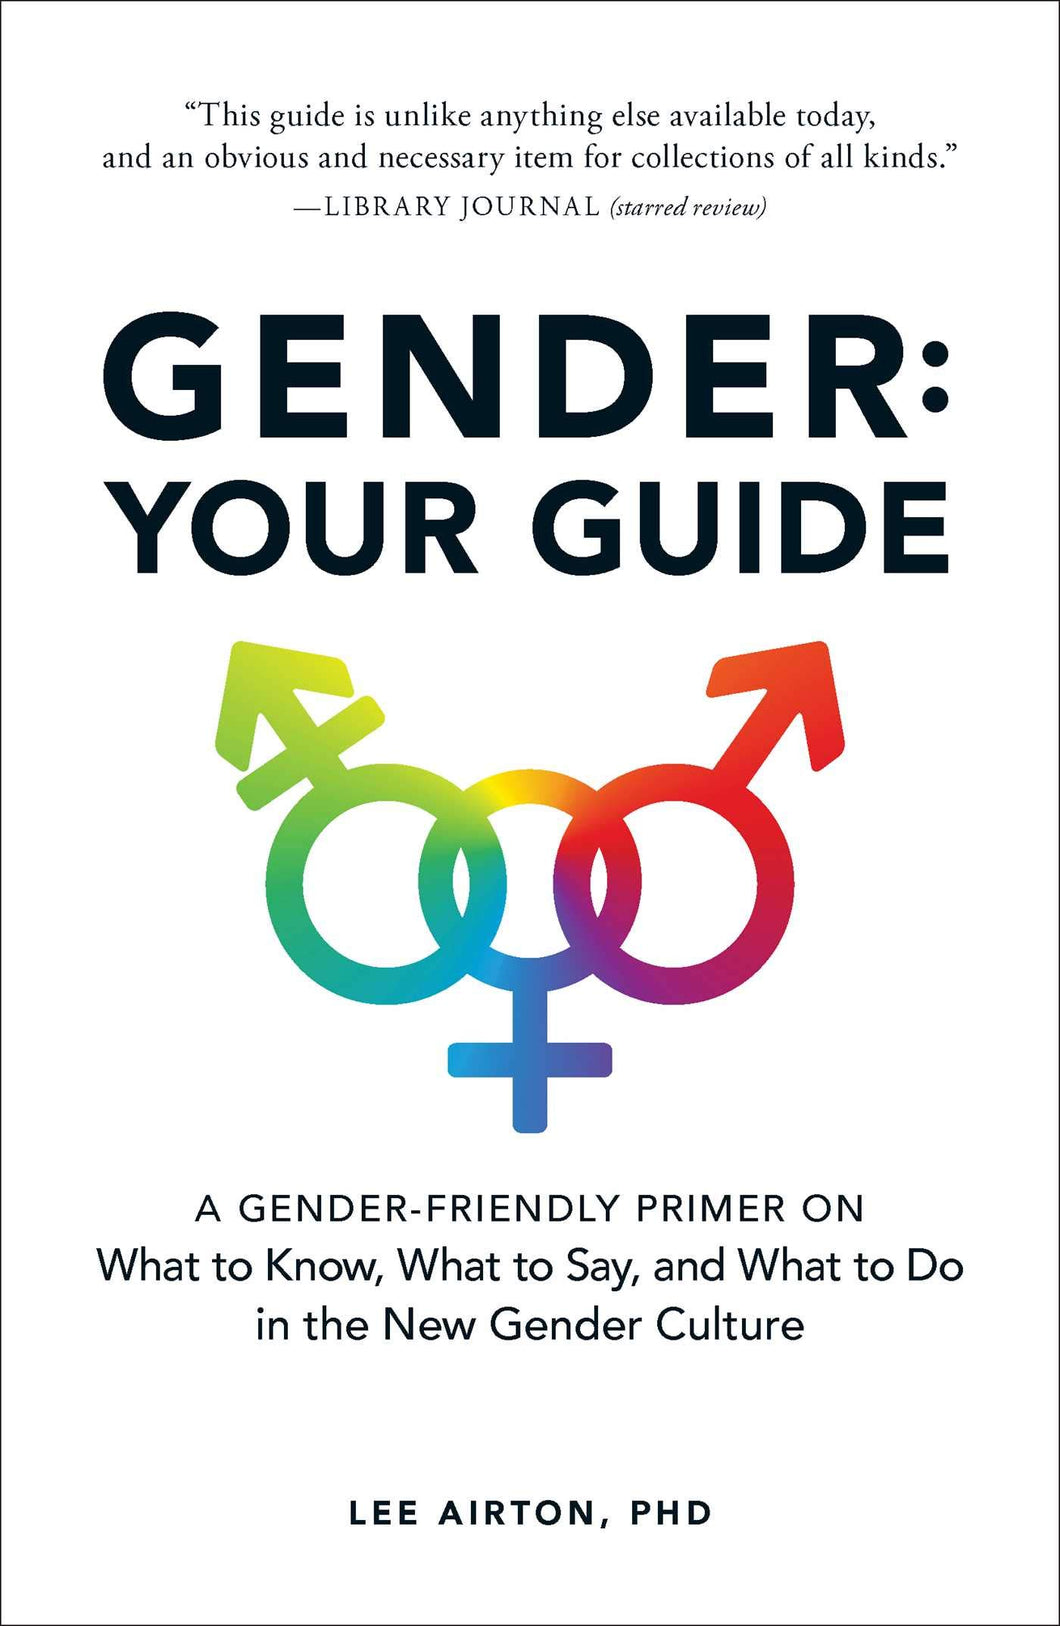 Gender: Your Guide [Lee Airton PhD]